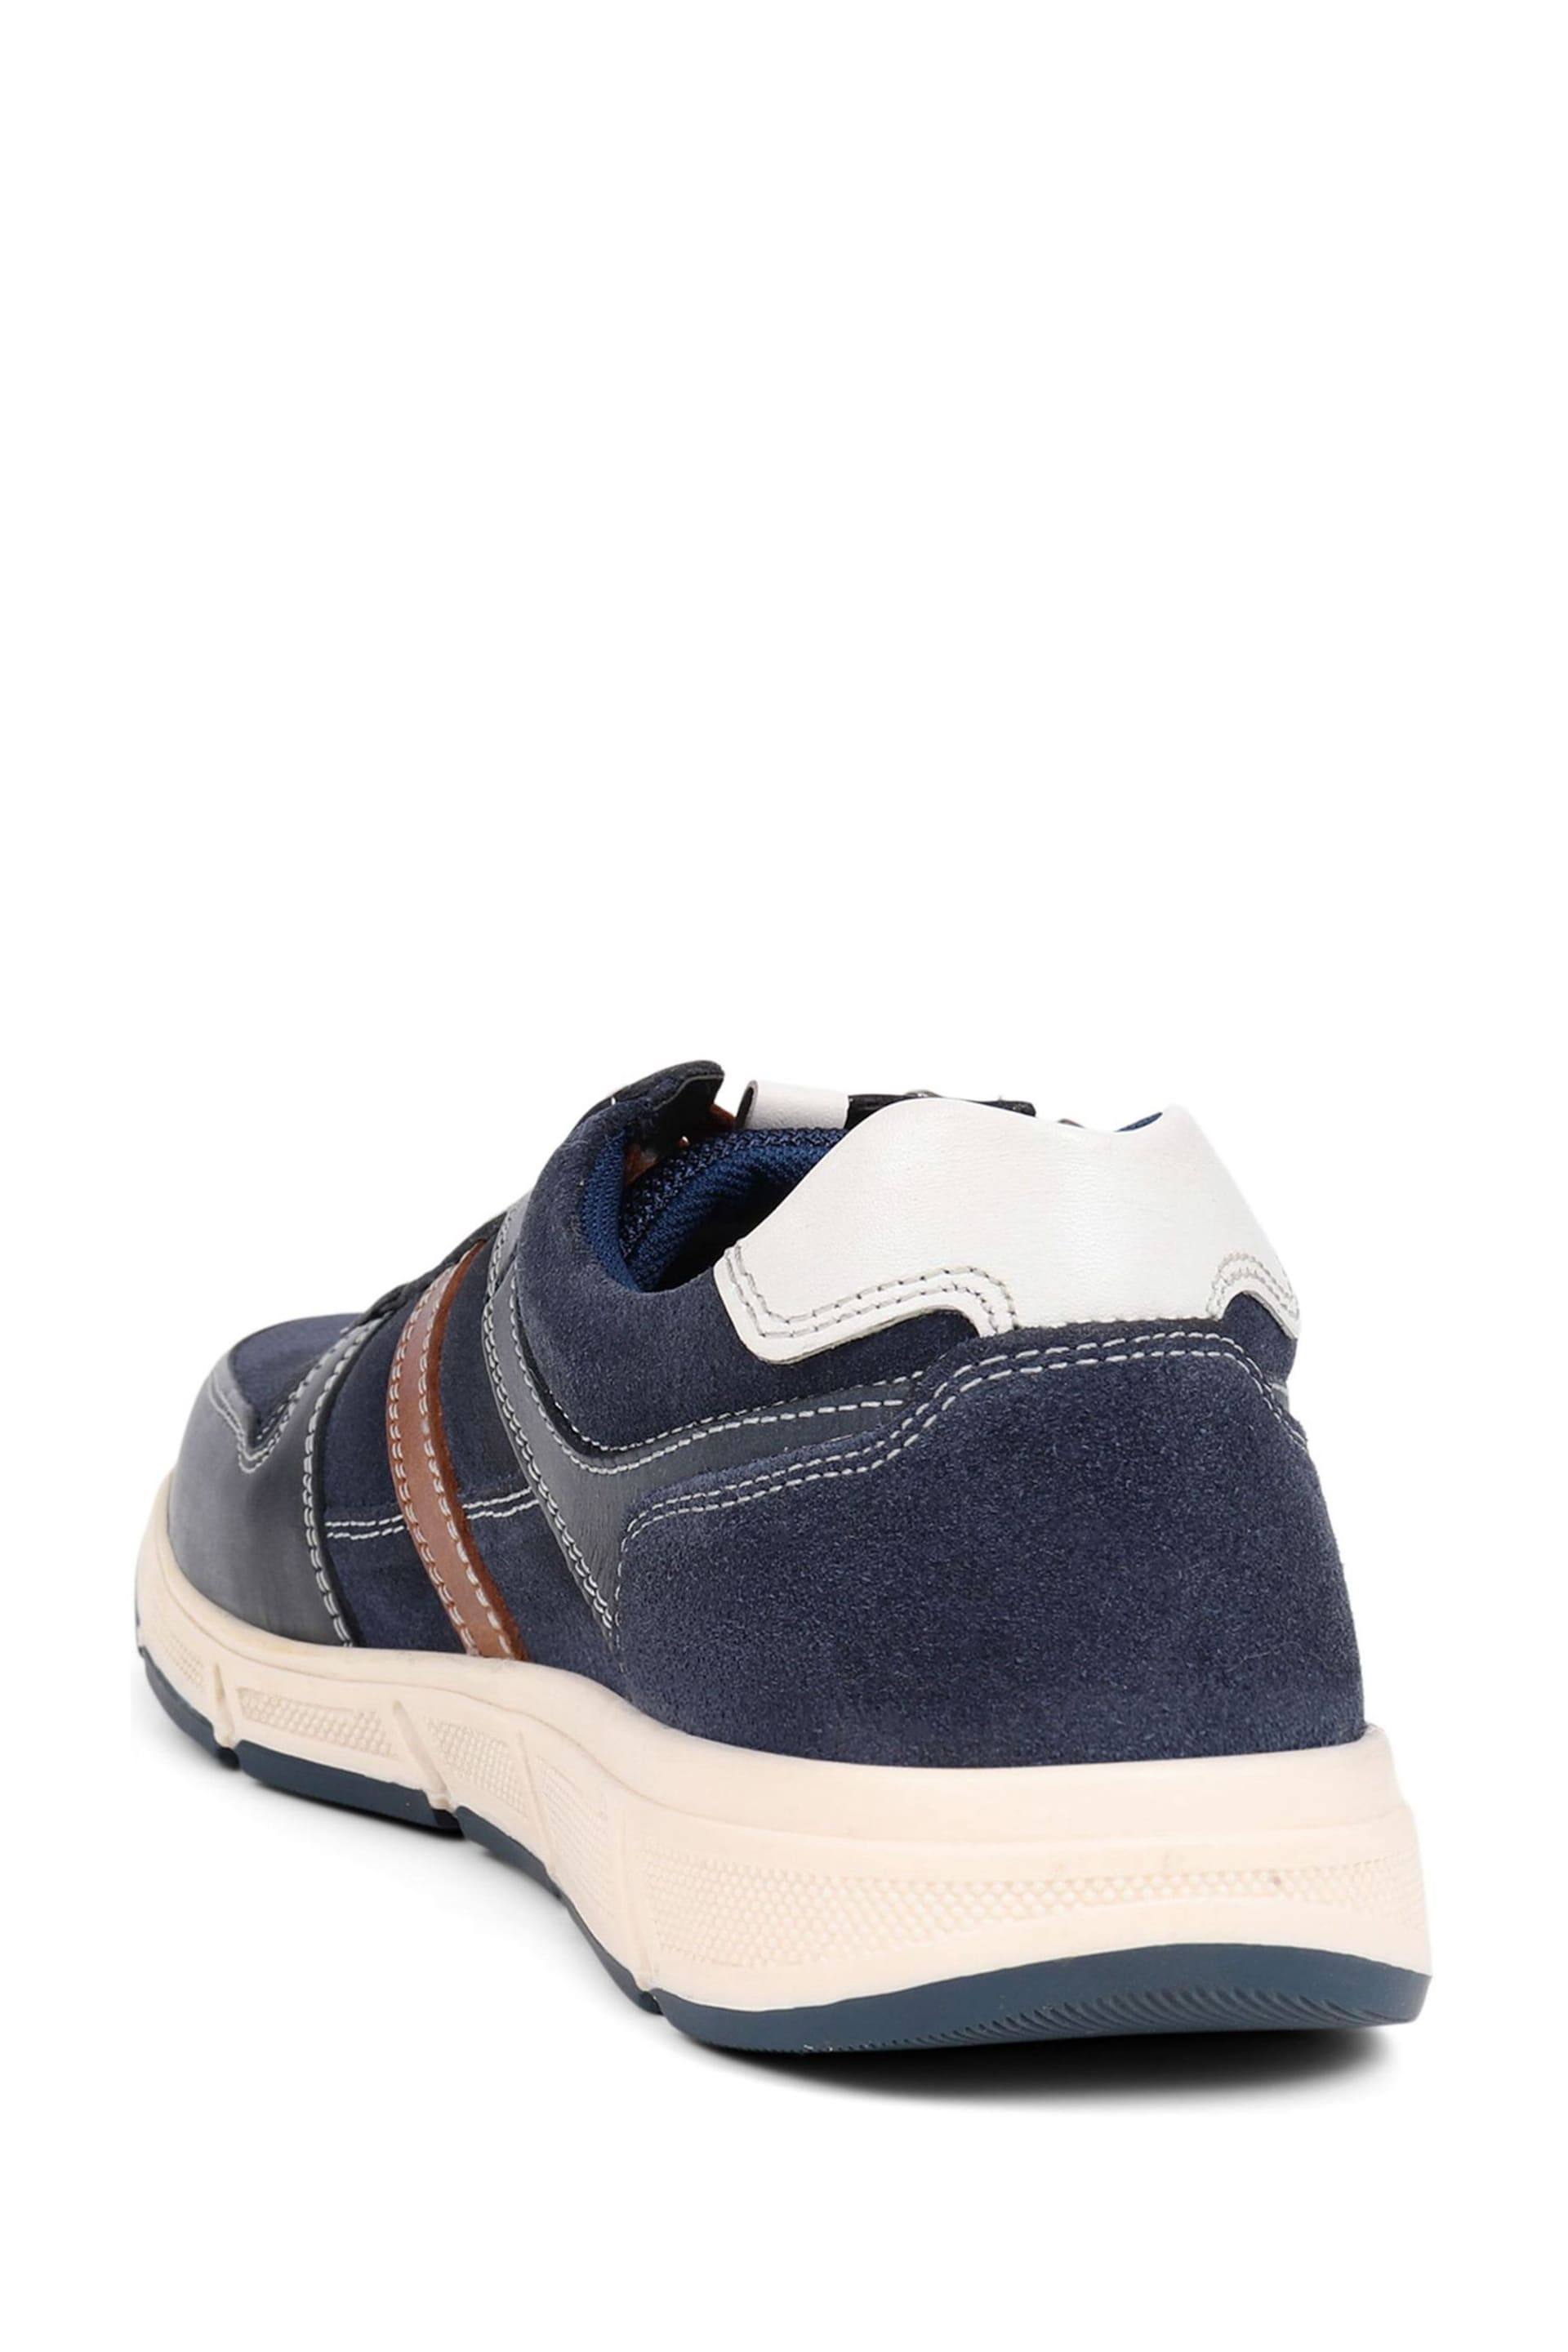 Pavers Blue Lace-Up Leather Trainers - Image 5 of 5